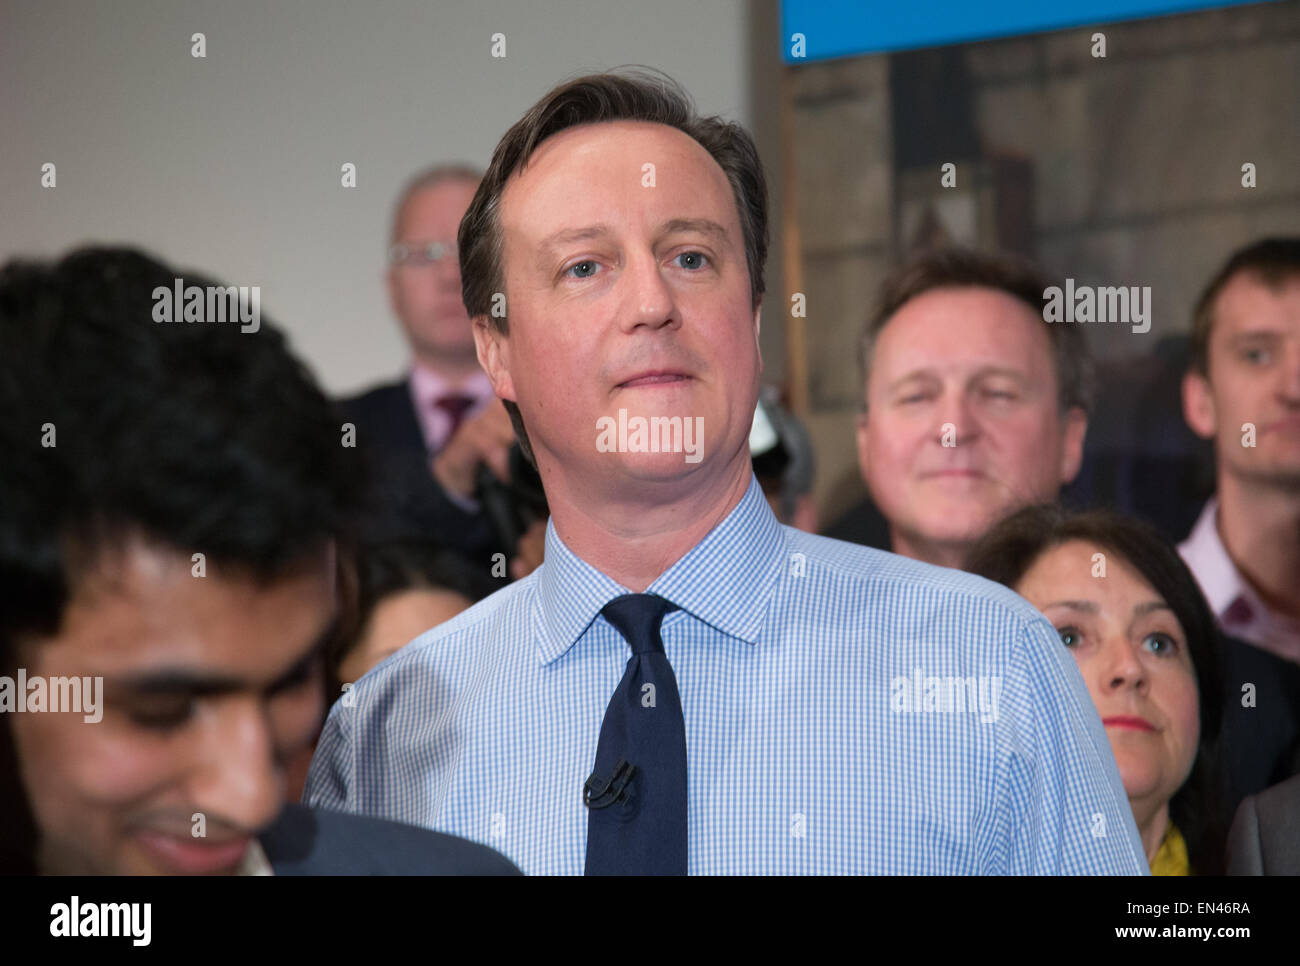 Prime minister,David Cameron,campaigning for the Conservative party in the City of London Stock Photo